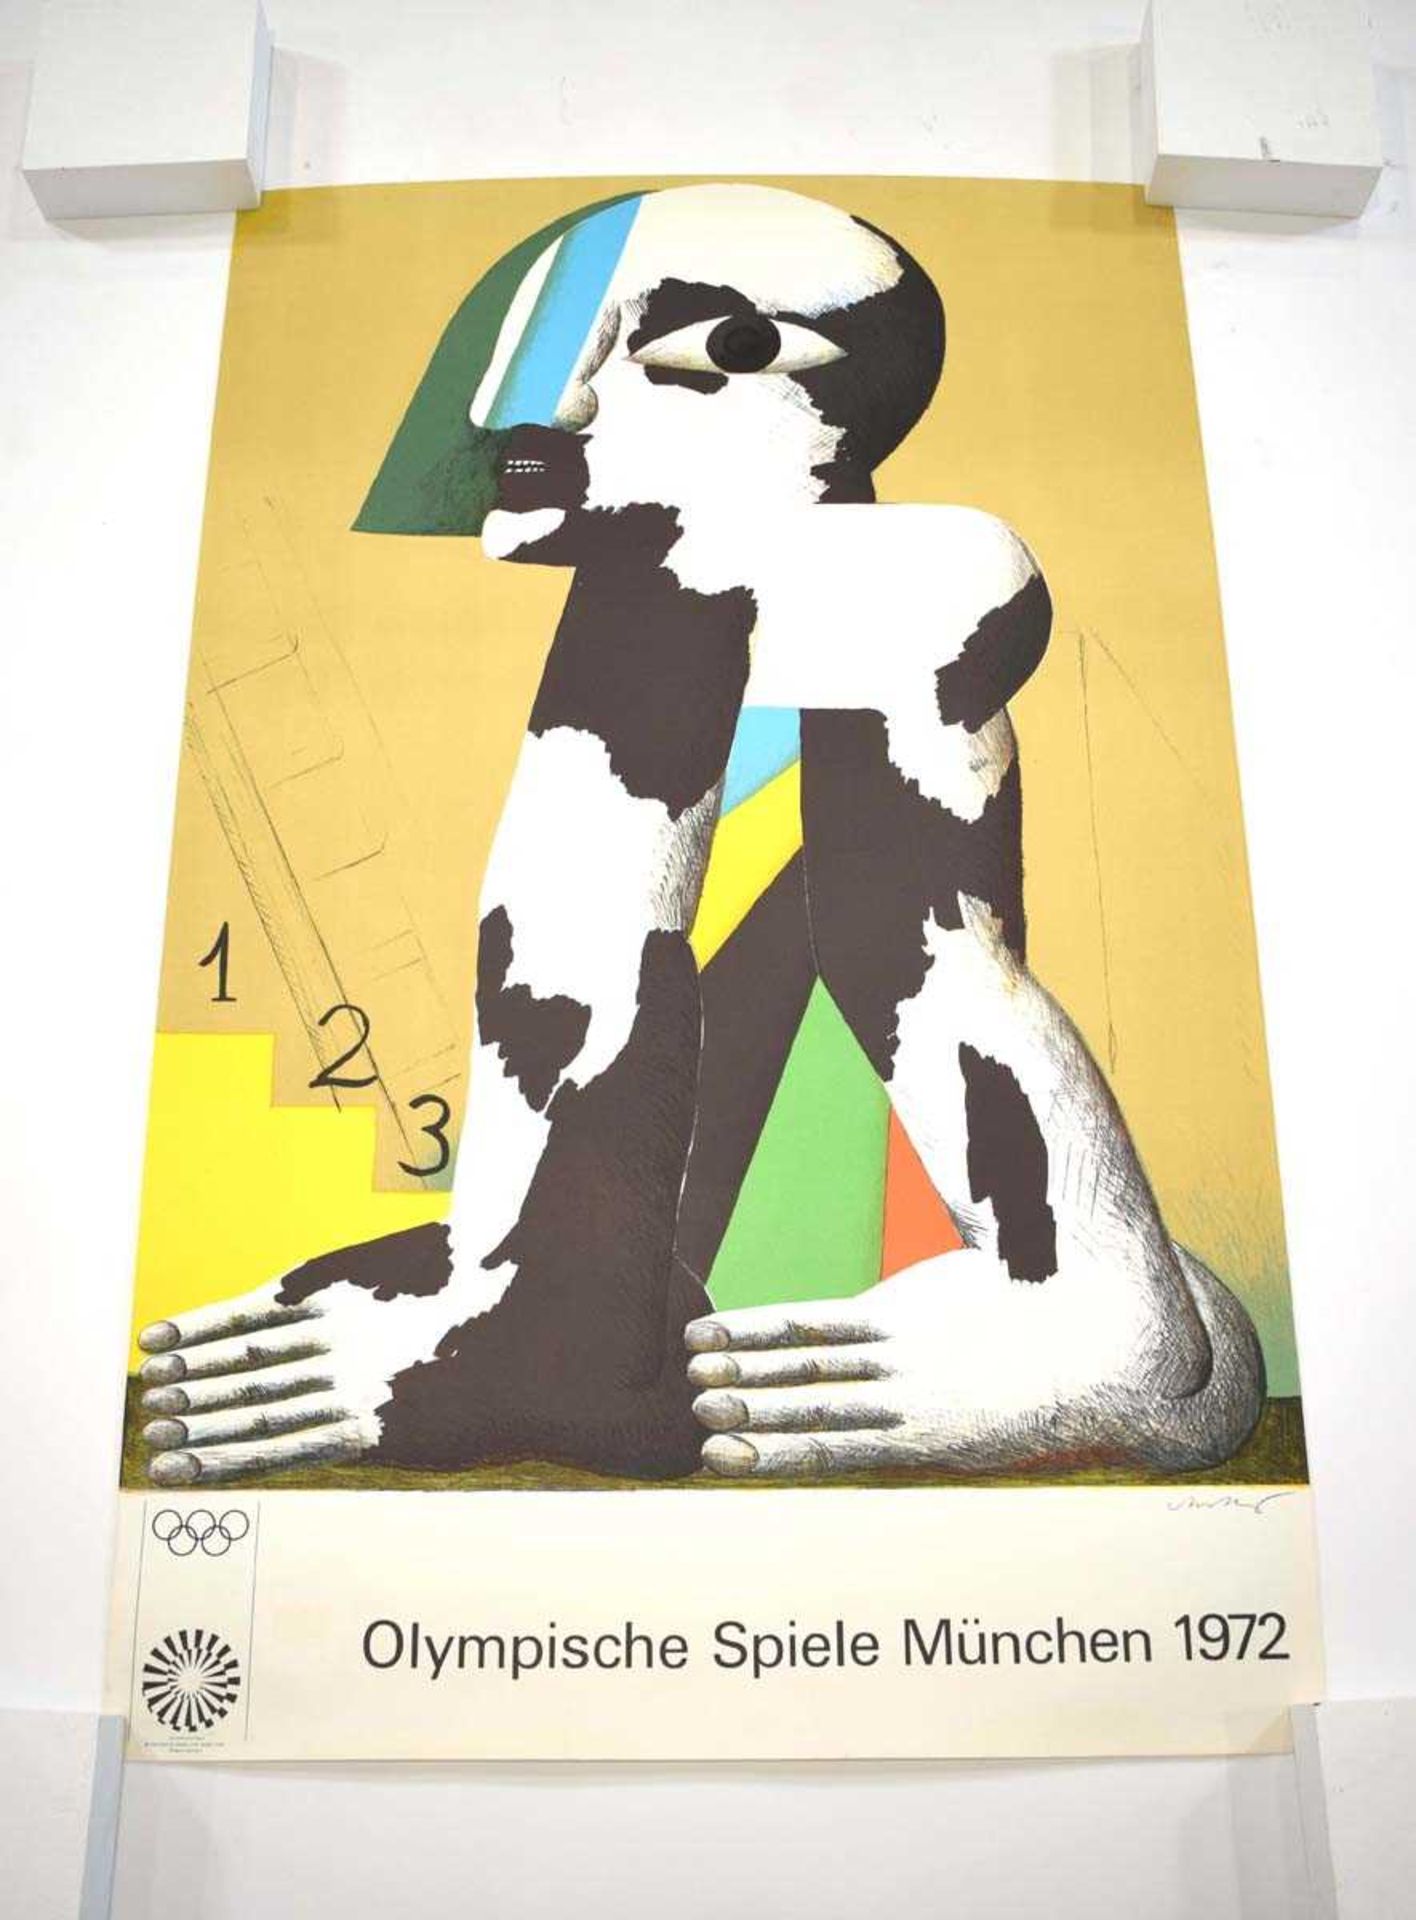 After Horst Antes (b. 1936), 'Olympische Spiele Munchen 1972' Munich Olympic poster, printed in